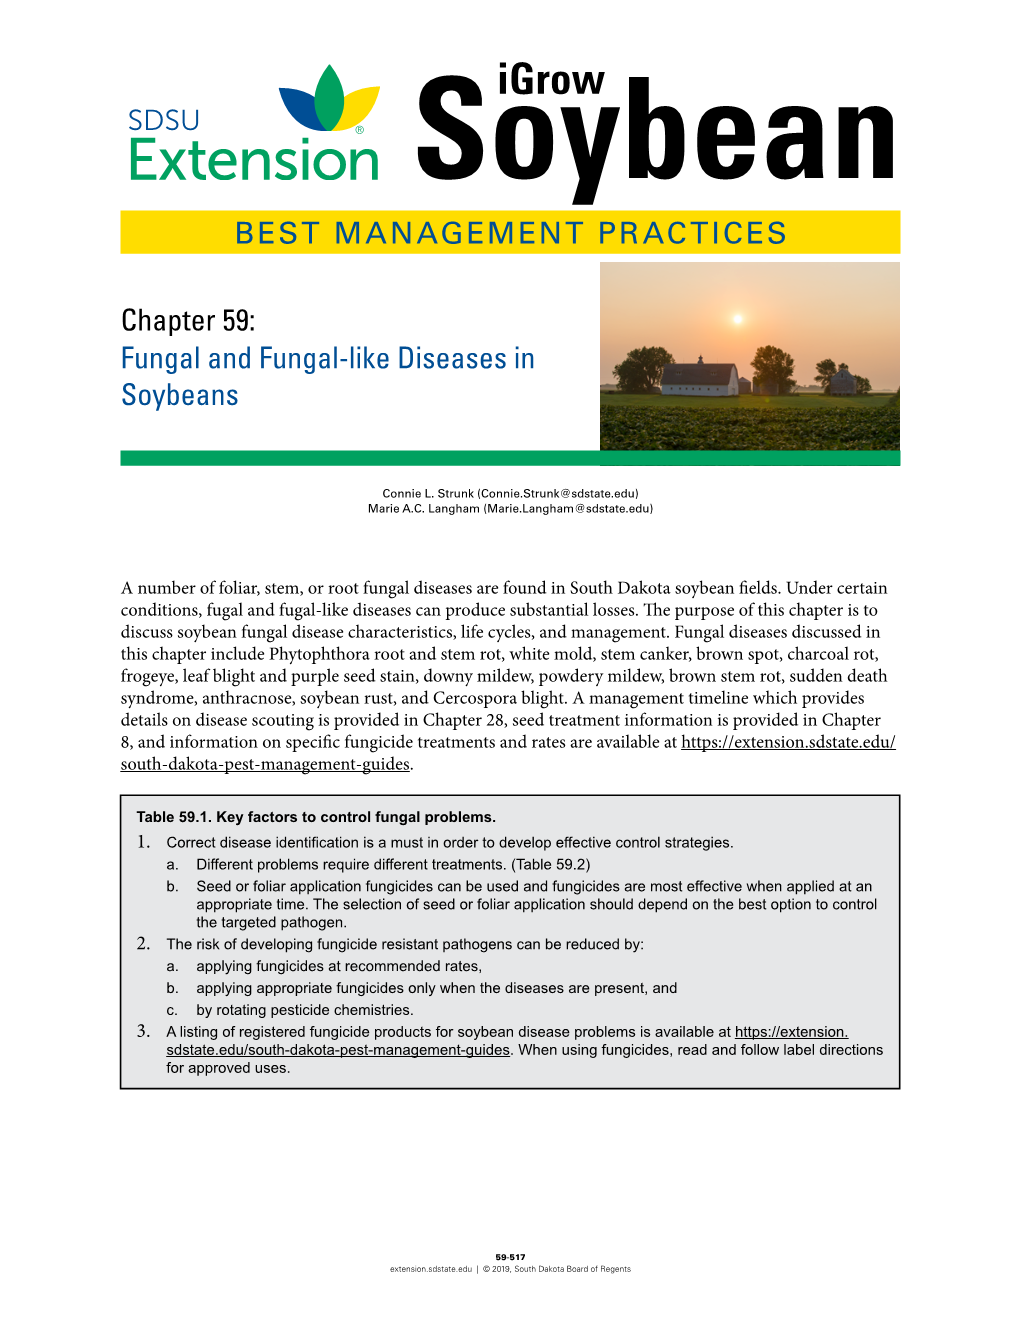 Fungal and Fungal-Like Diseases in Soybeans